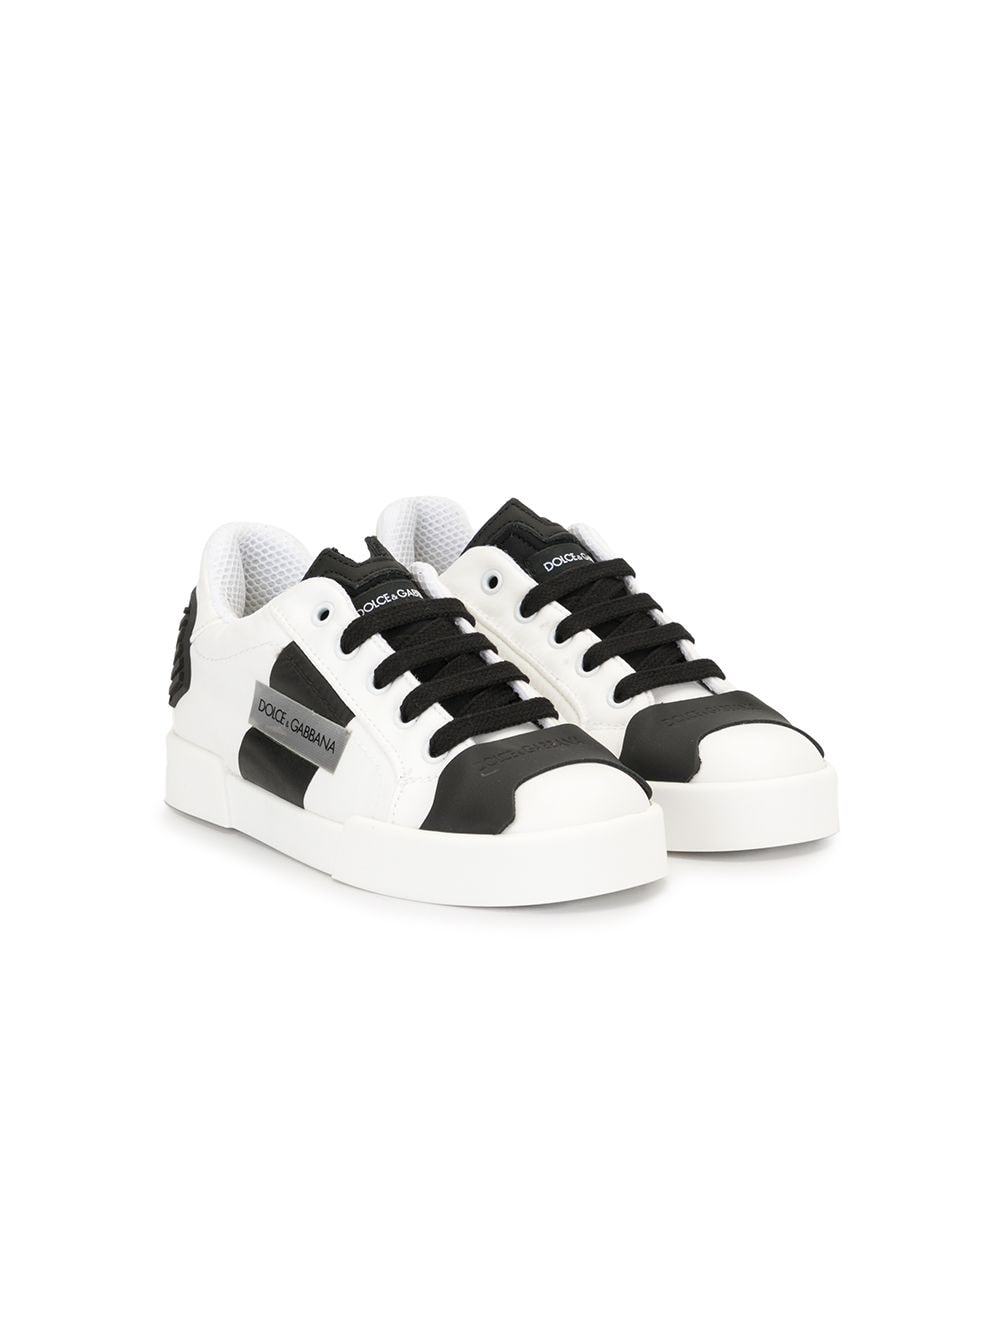 DOLCE & GABBANA LACE-UP SNEAKERS